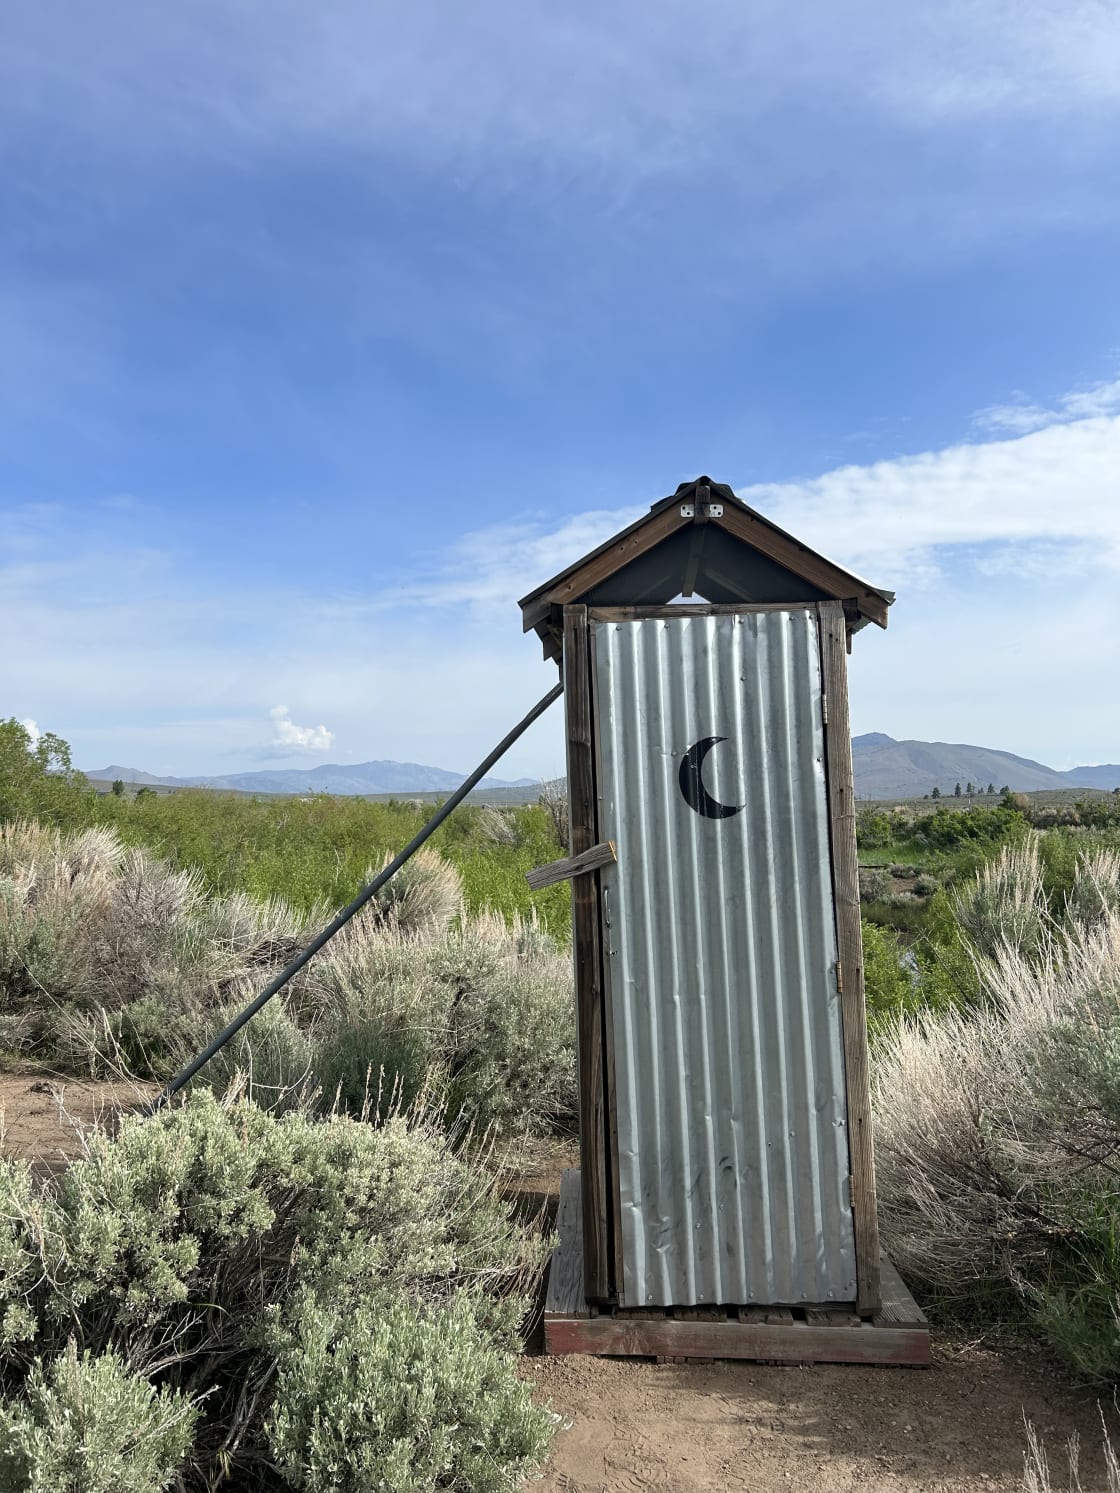 Super nifty composting toilet 